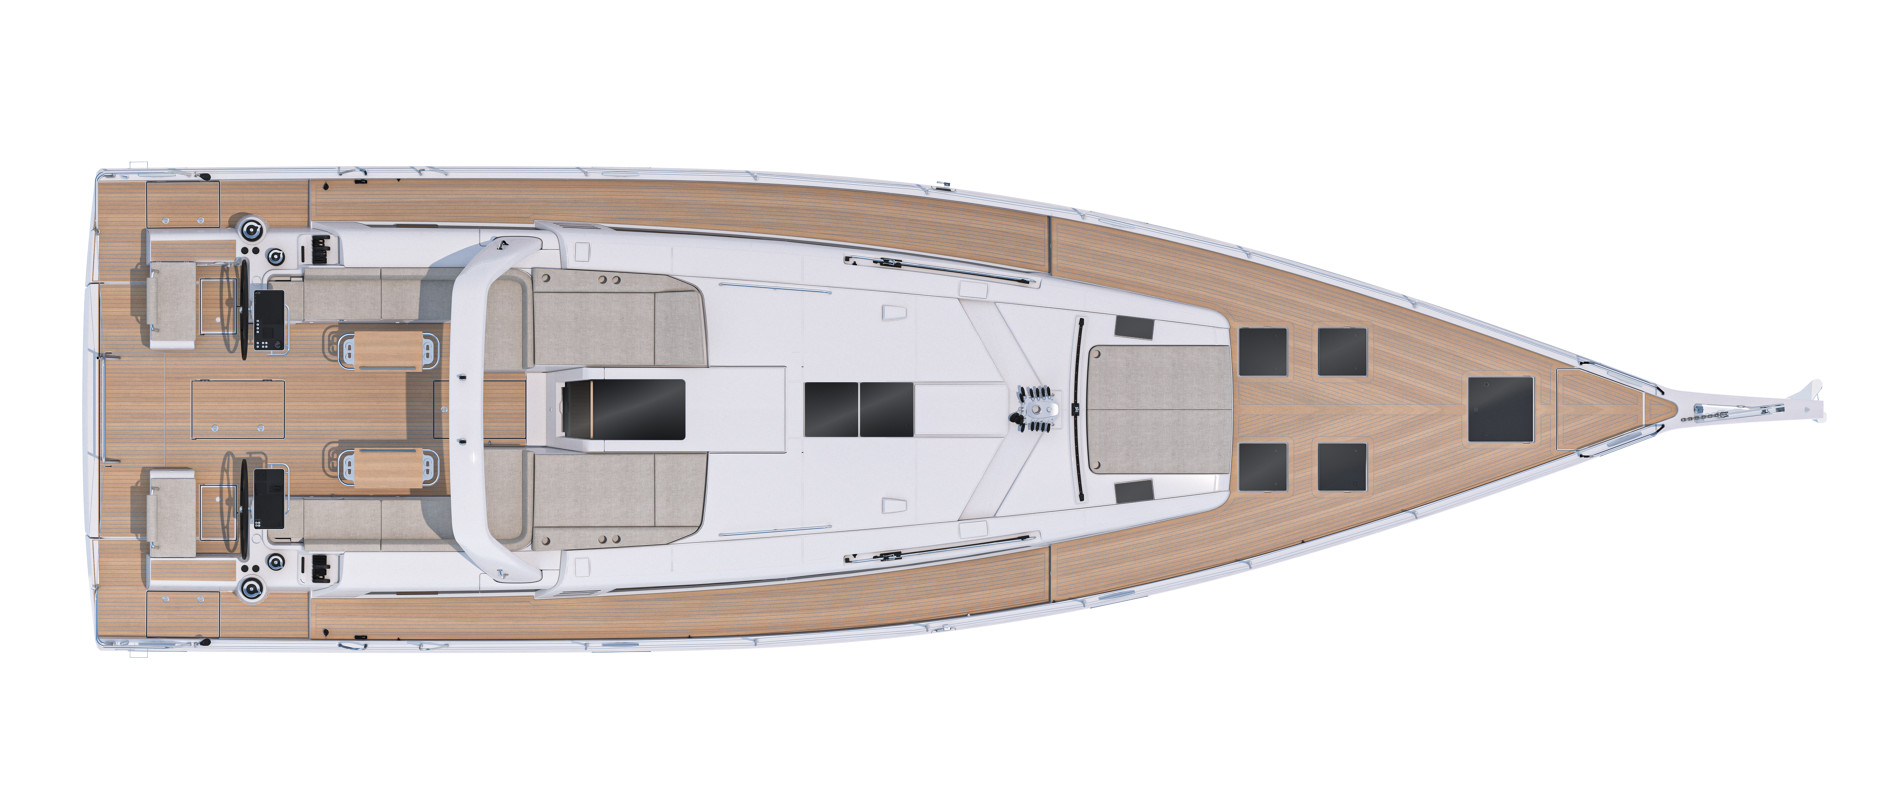 Oceanis yacht 60 deck layout